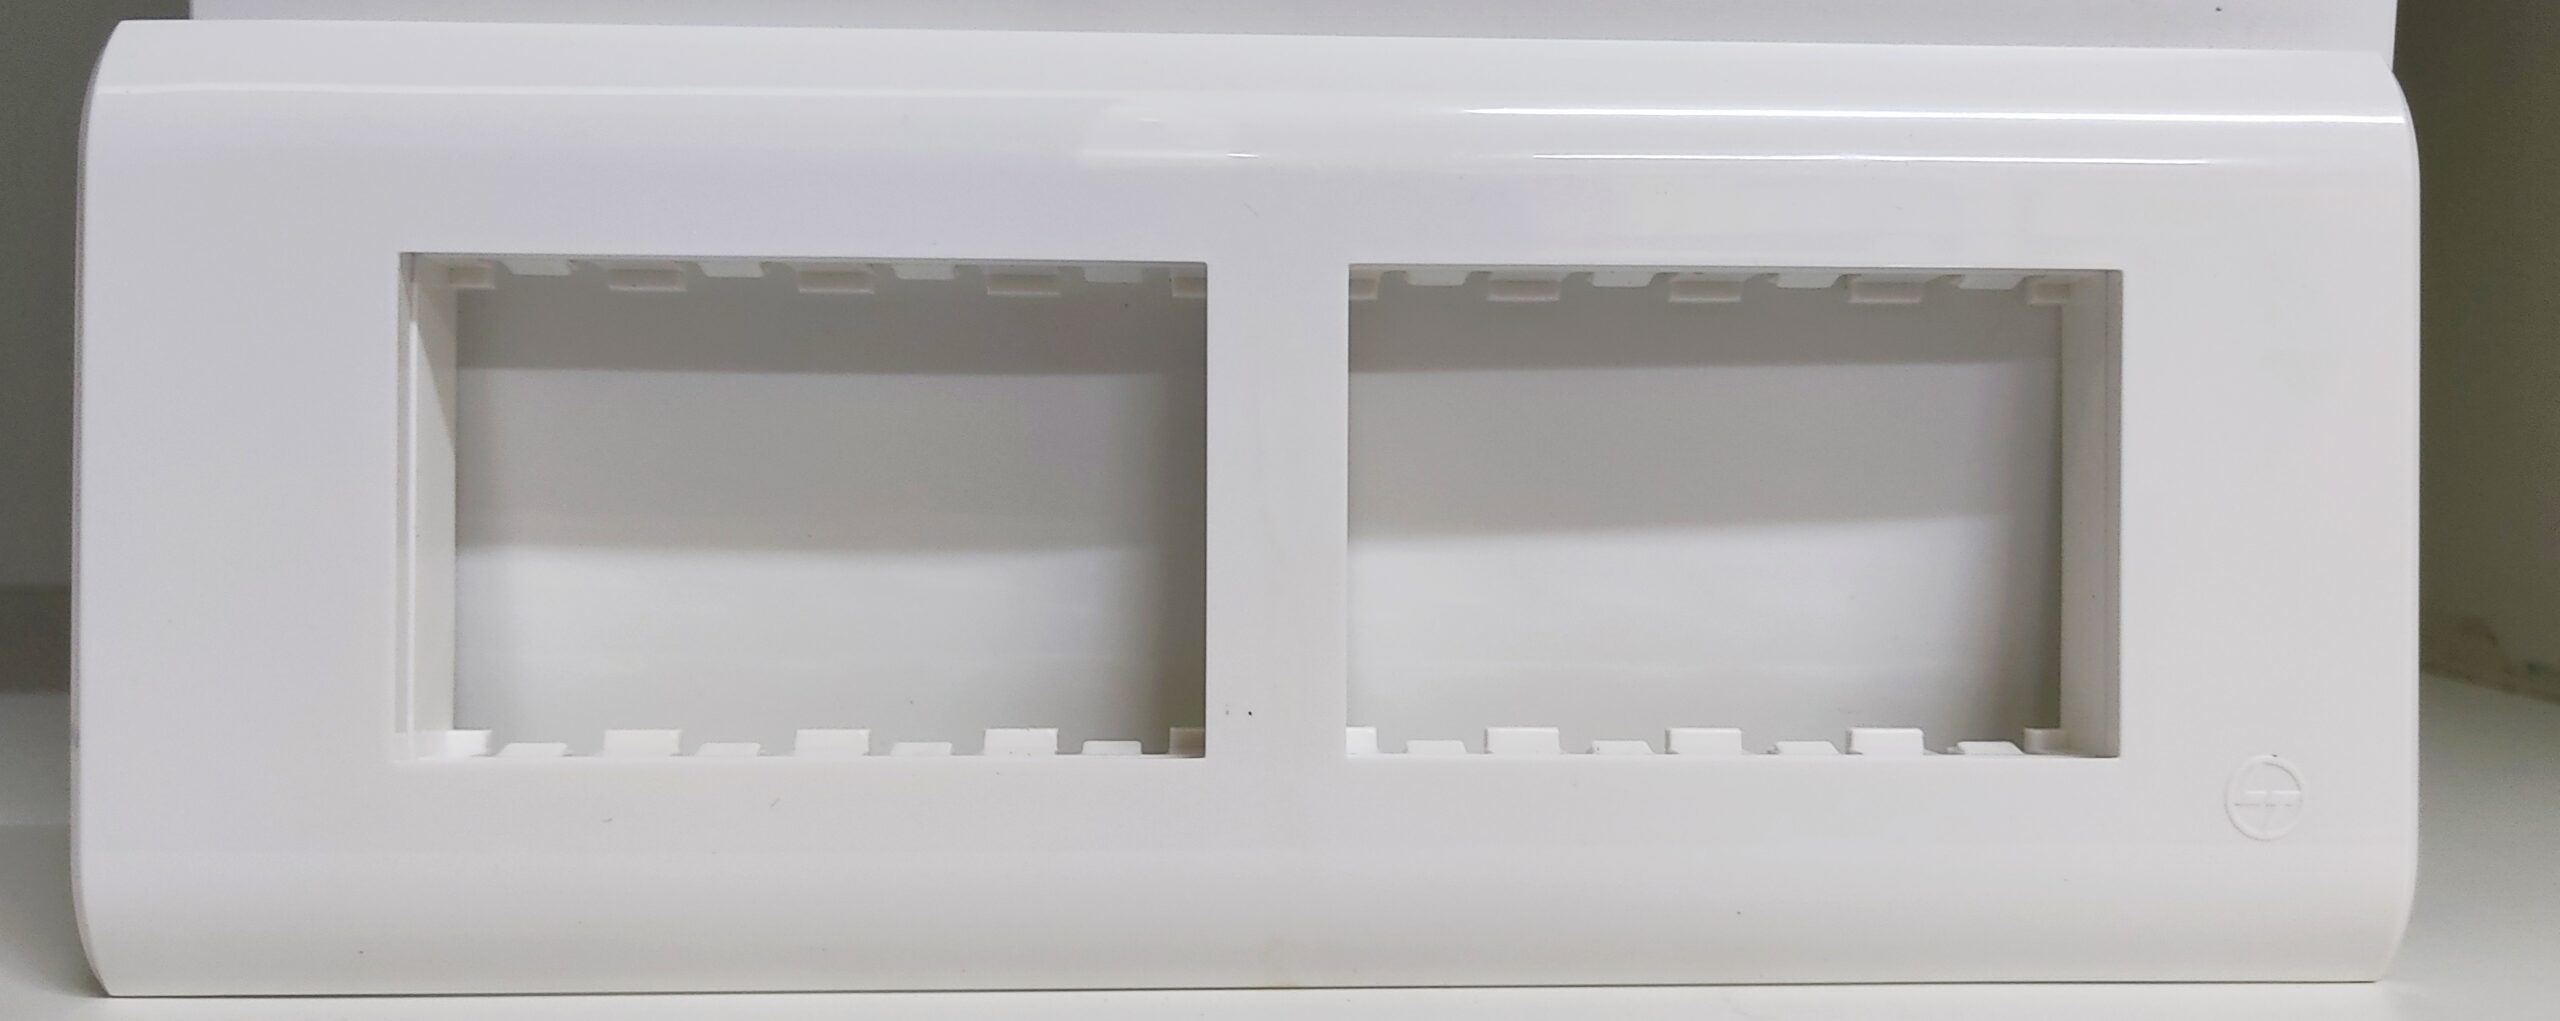 8 Module (Horizontal) Cover Plate with Base Frame , L&T ORIS - White